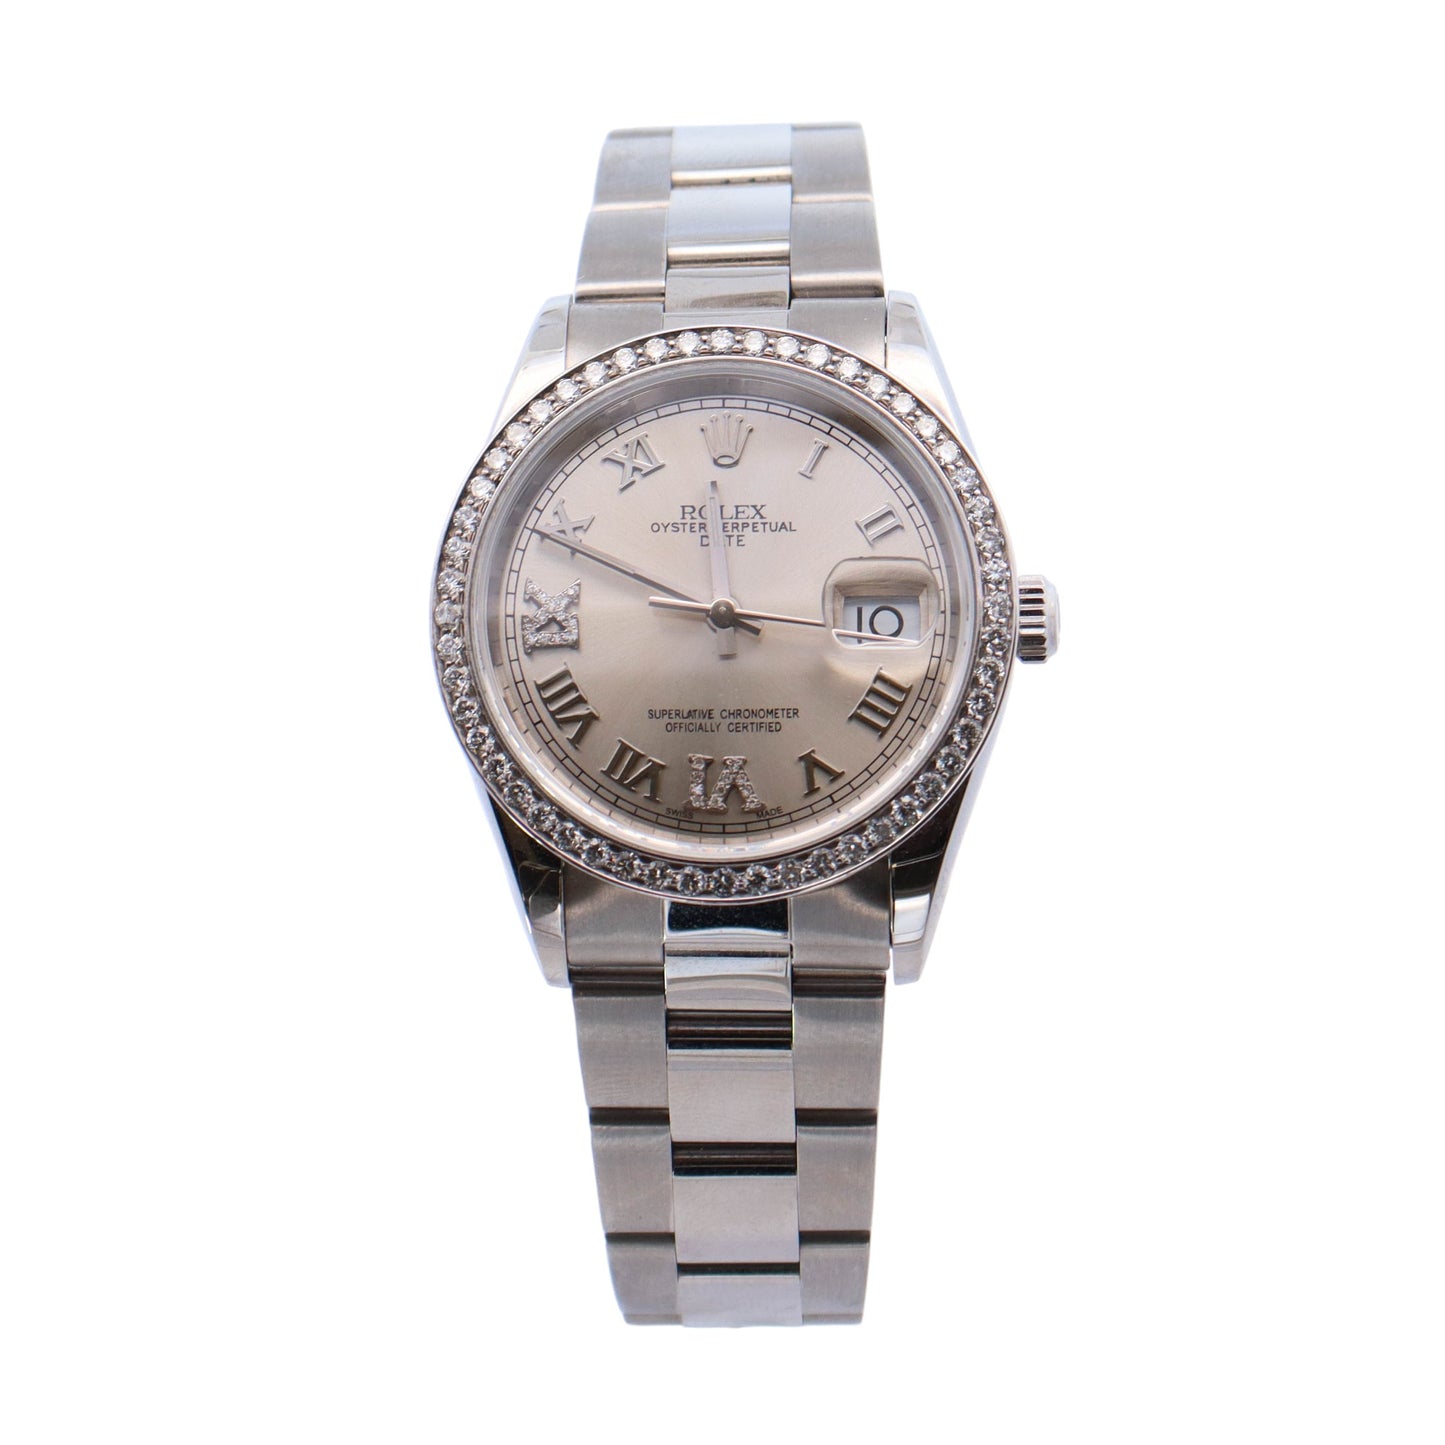 Rolex Oyster Perpetual Stainless Steel 34mm Custom Silver Roman Diamond Dial Watch Reference #: 15210